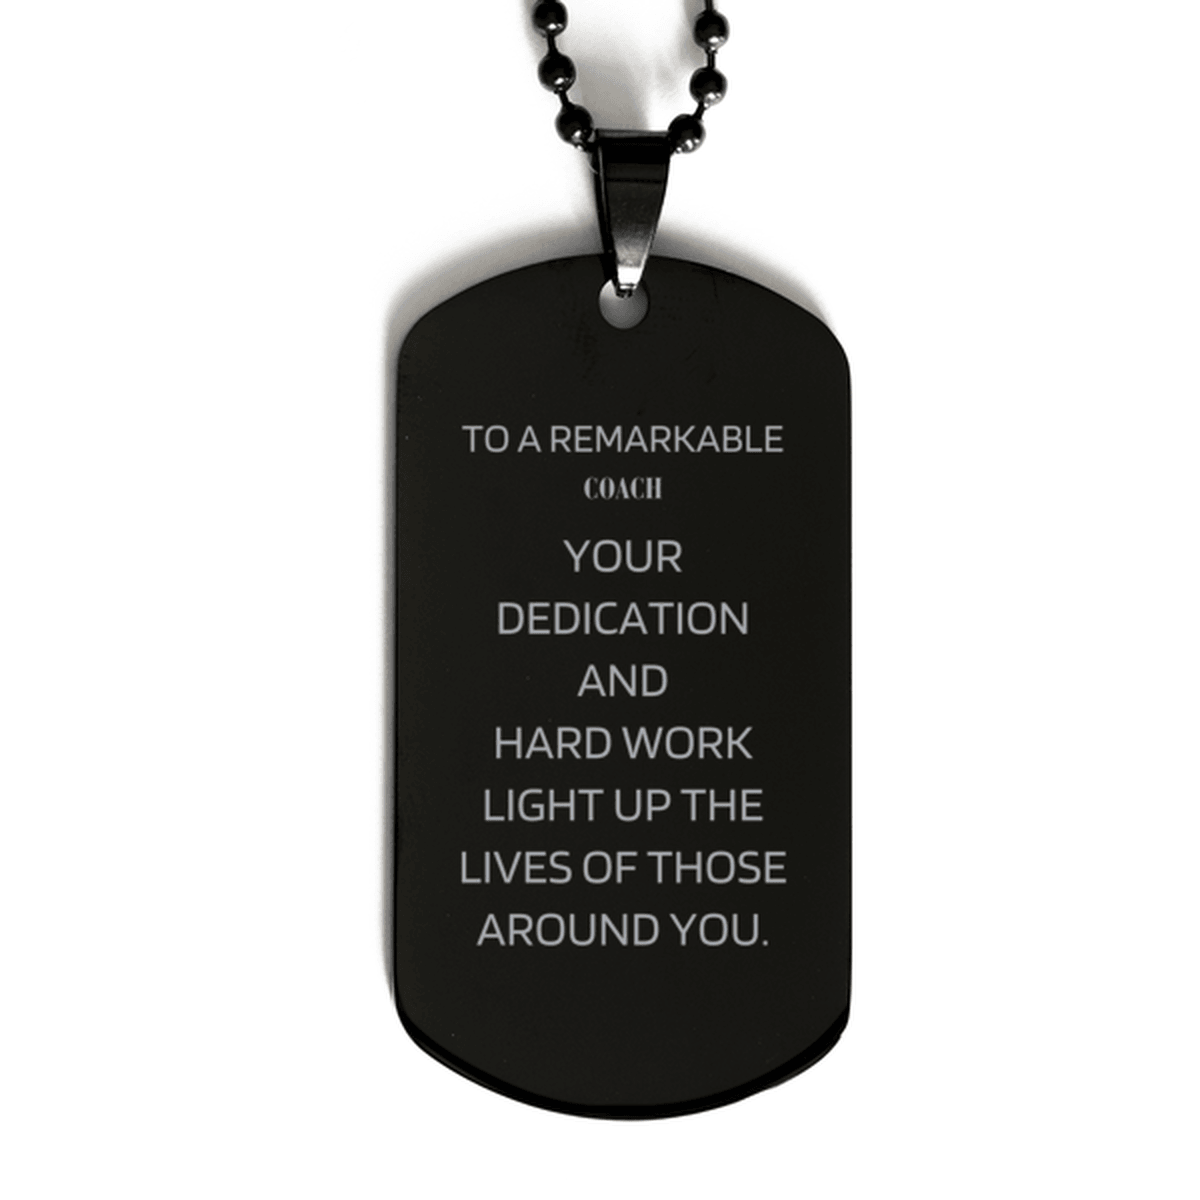 Remarkable Coach Gifts, Your dedication and hard work, Inspirational Birthday Christmas Unique Black Dog Tag For Coach, Coworkers, Men, Women, Friends - Mallard Moon Gift Shop